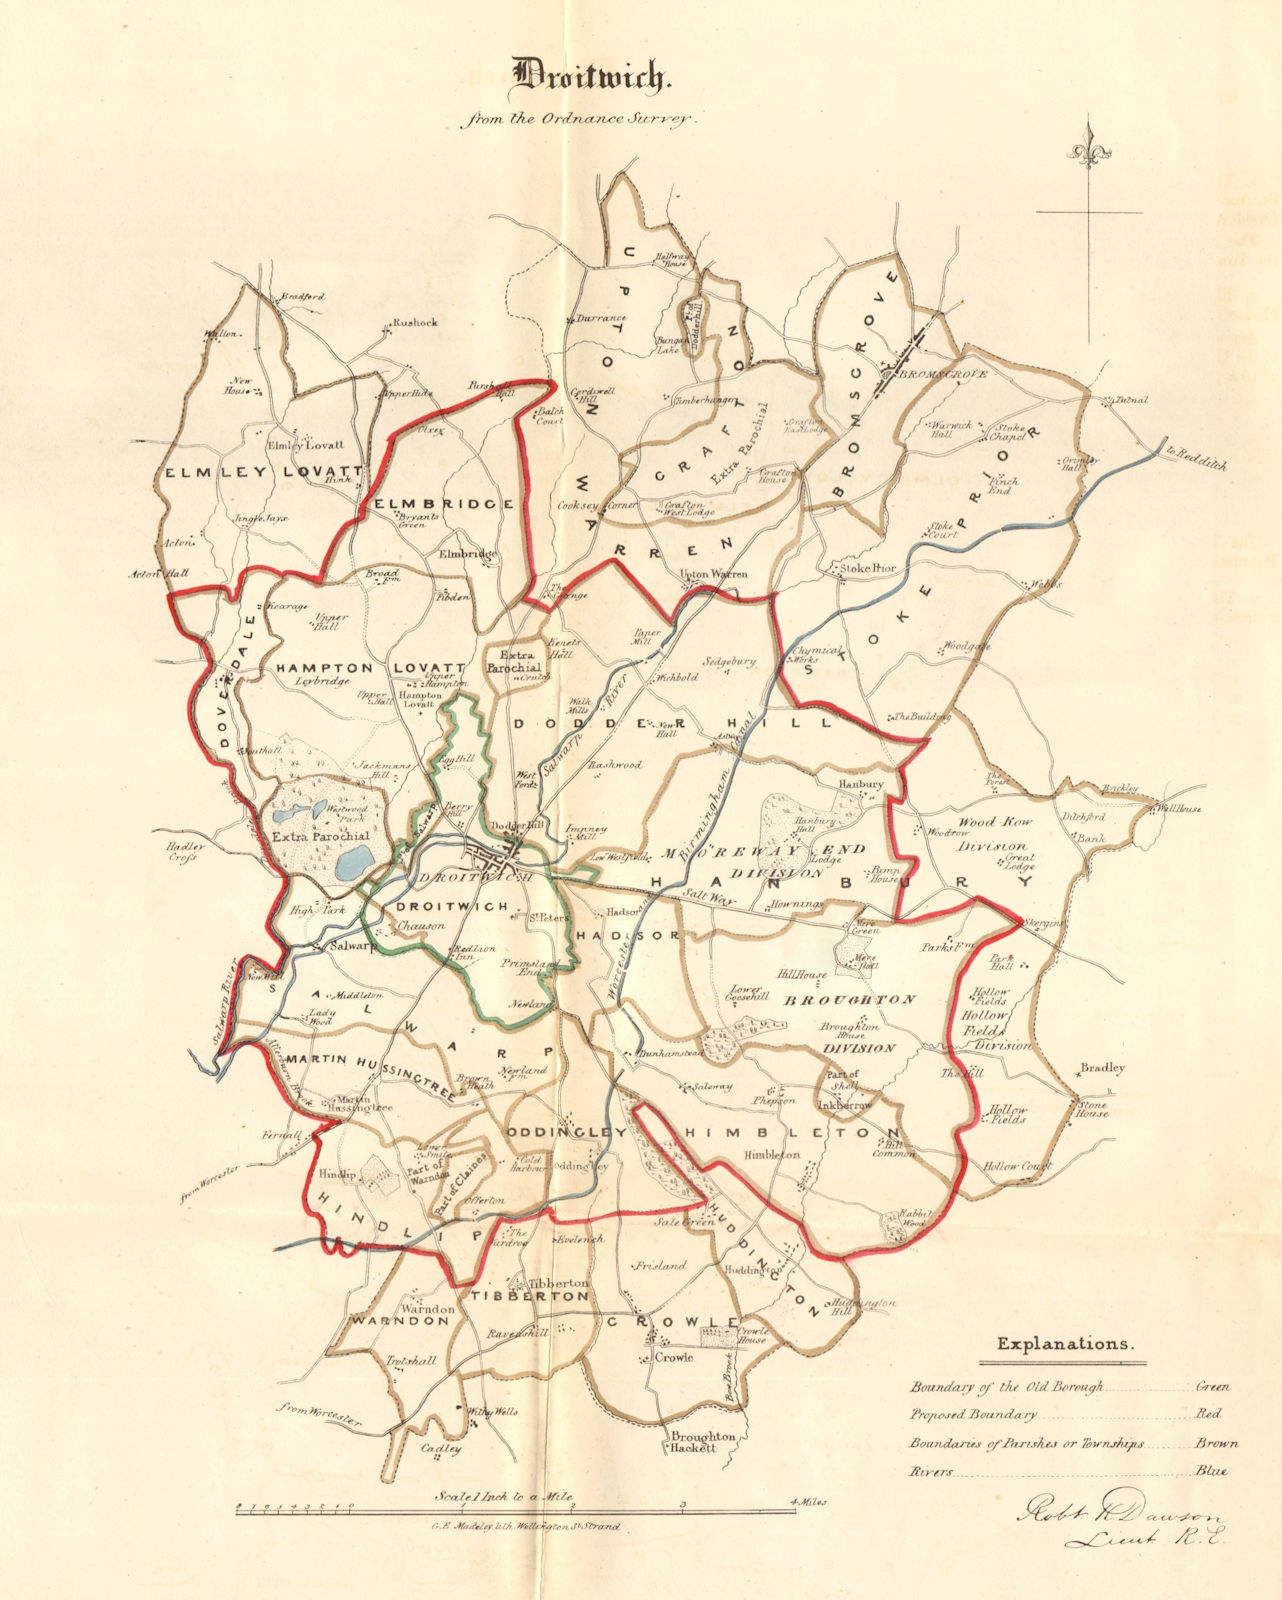 DROITWICH borough/town plan REFORM ACT Bromsgrove Worcestershire DAWSON 1832 map